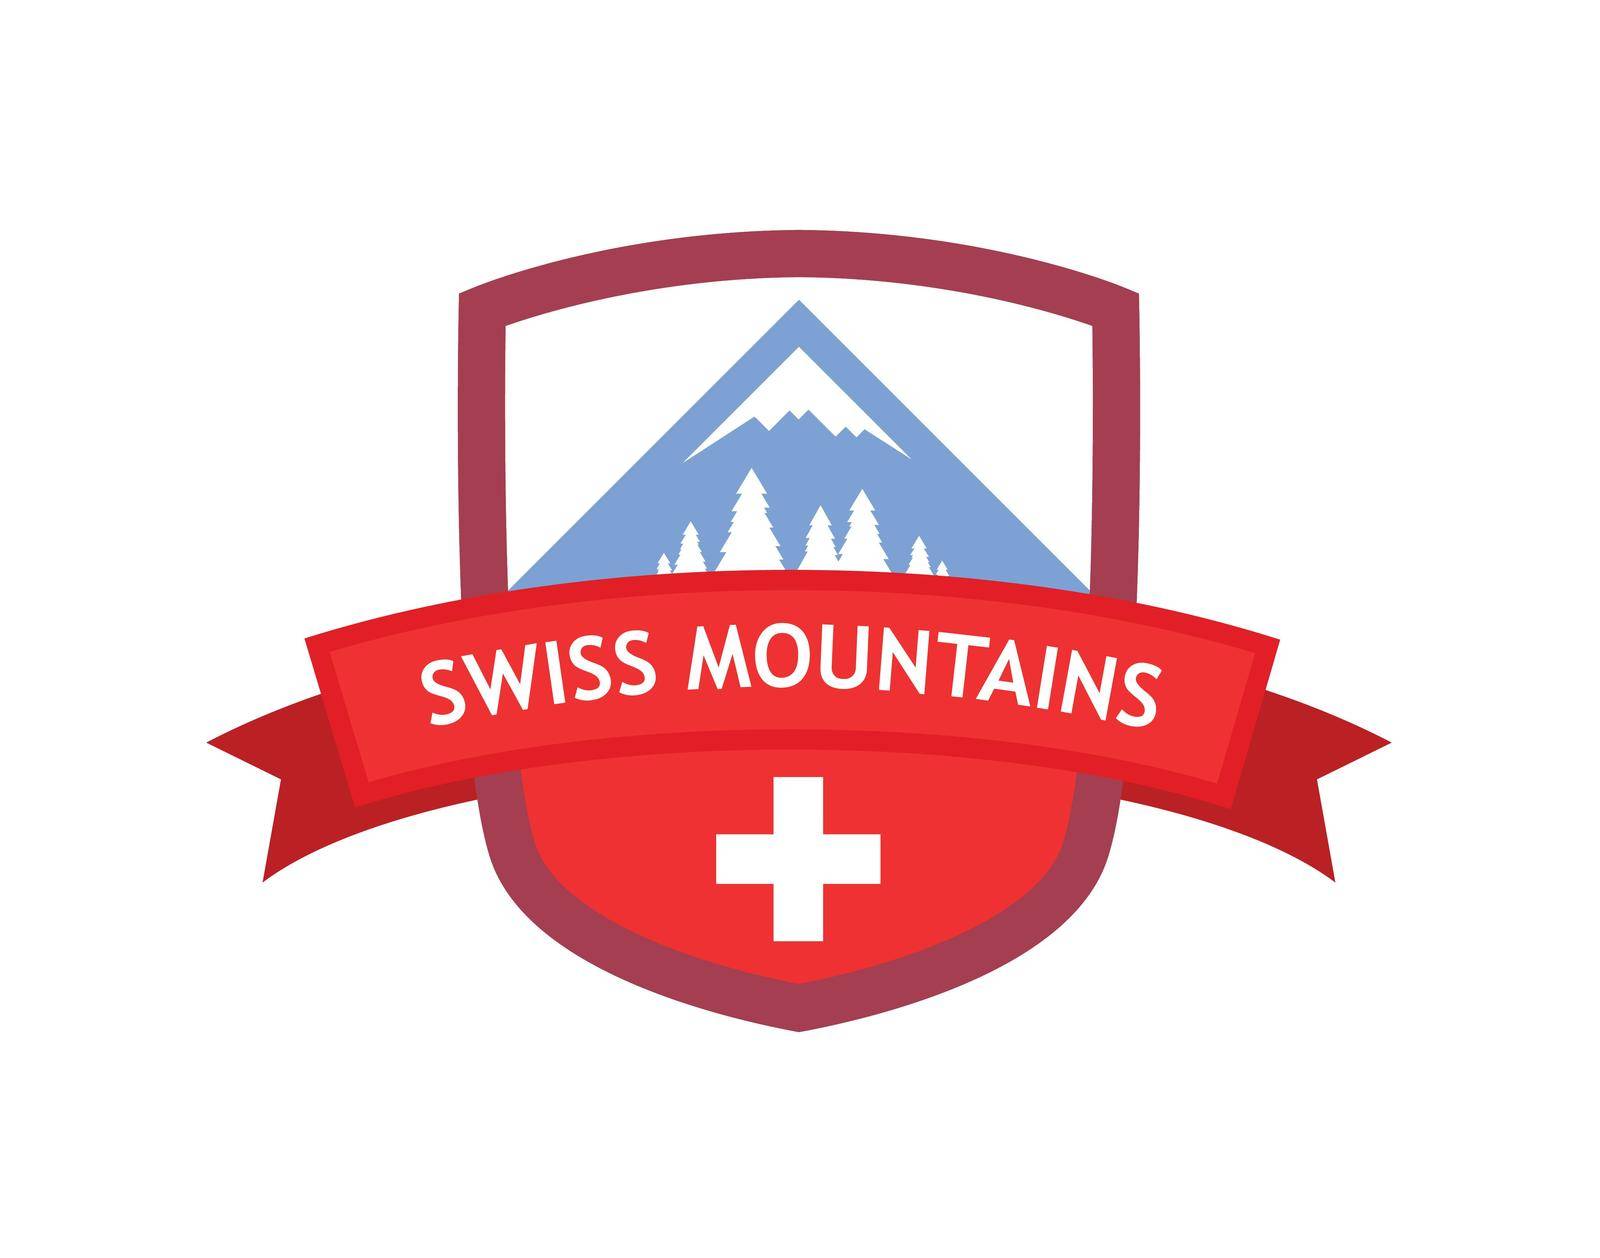 Coat of Arms with Illustration of Swiss Mountain Nature. Red Modern Design of Emblem with color of Switzerland Flag isolated on white background.